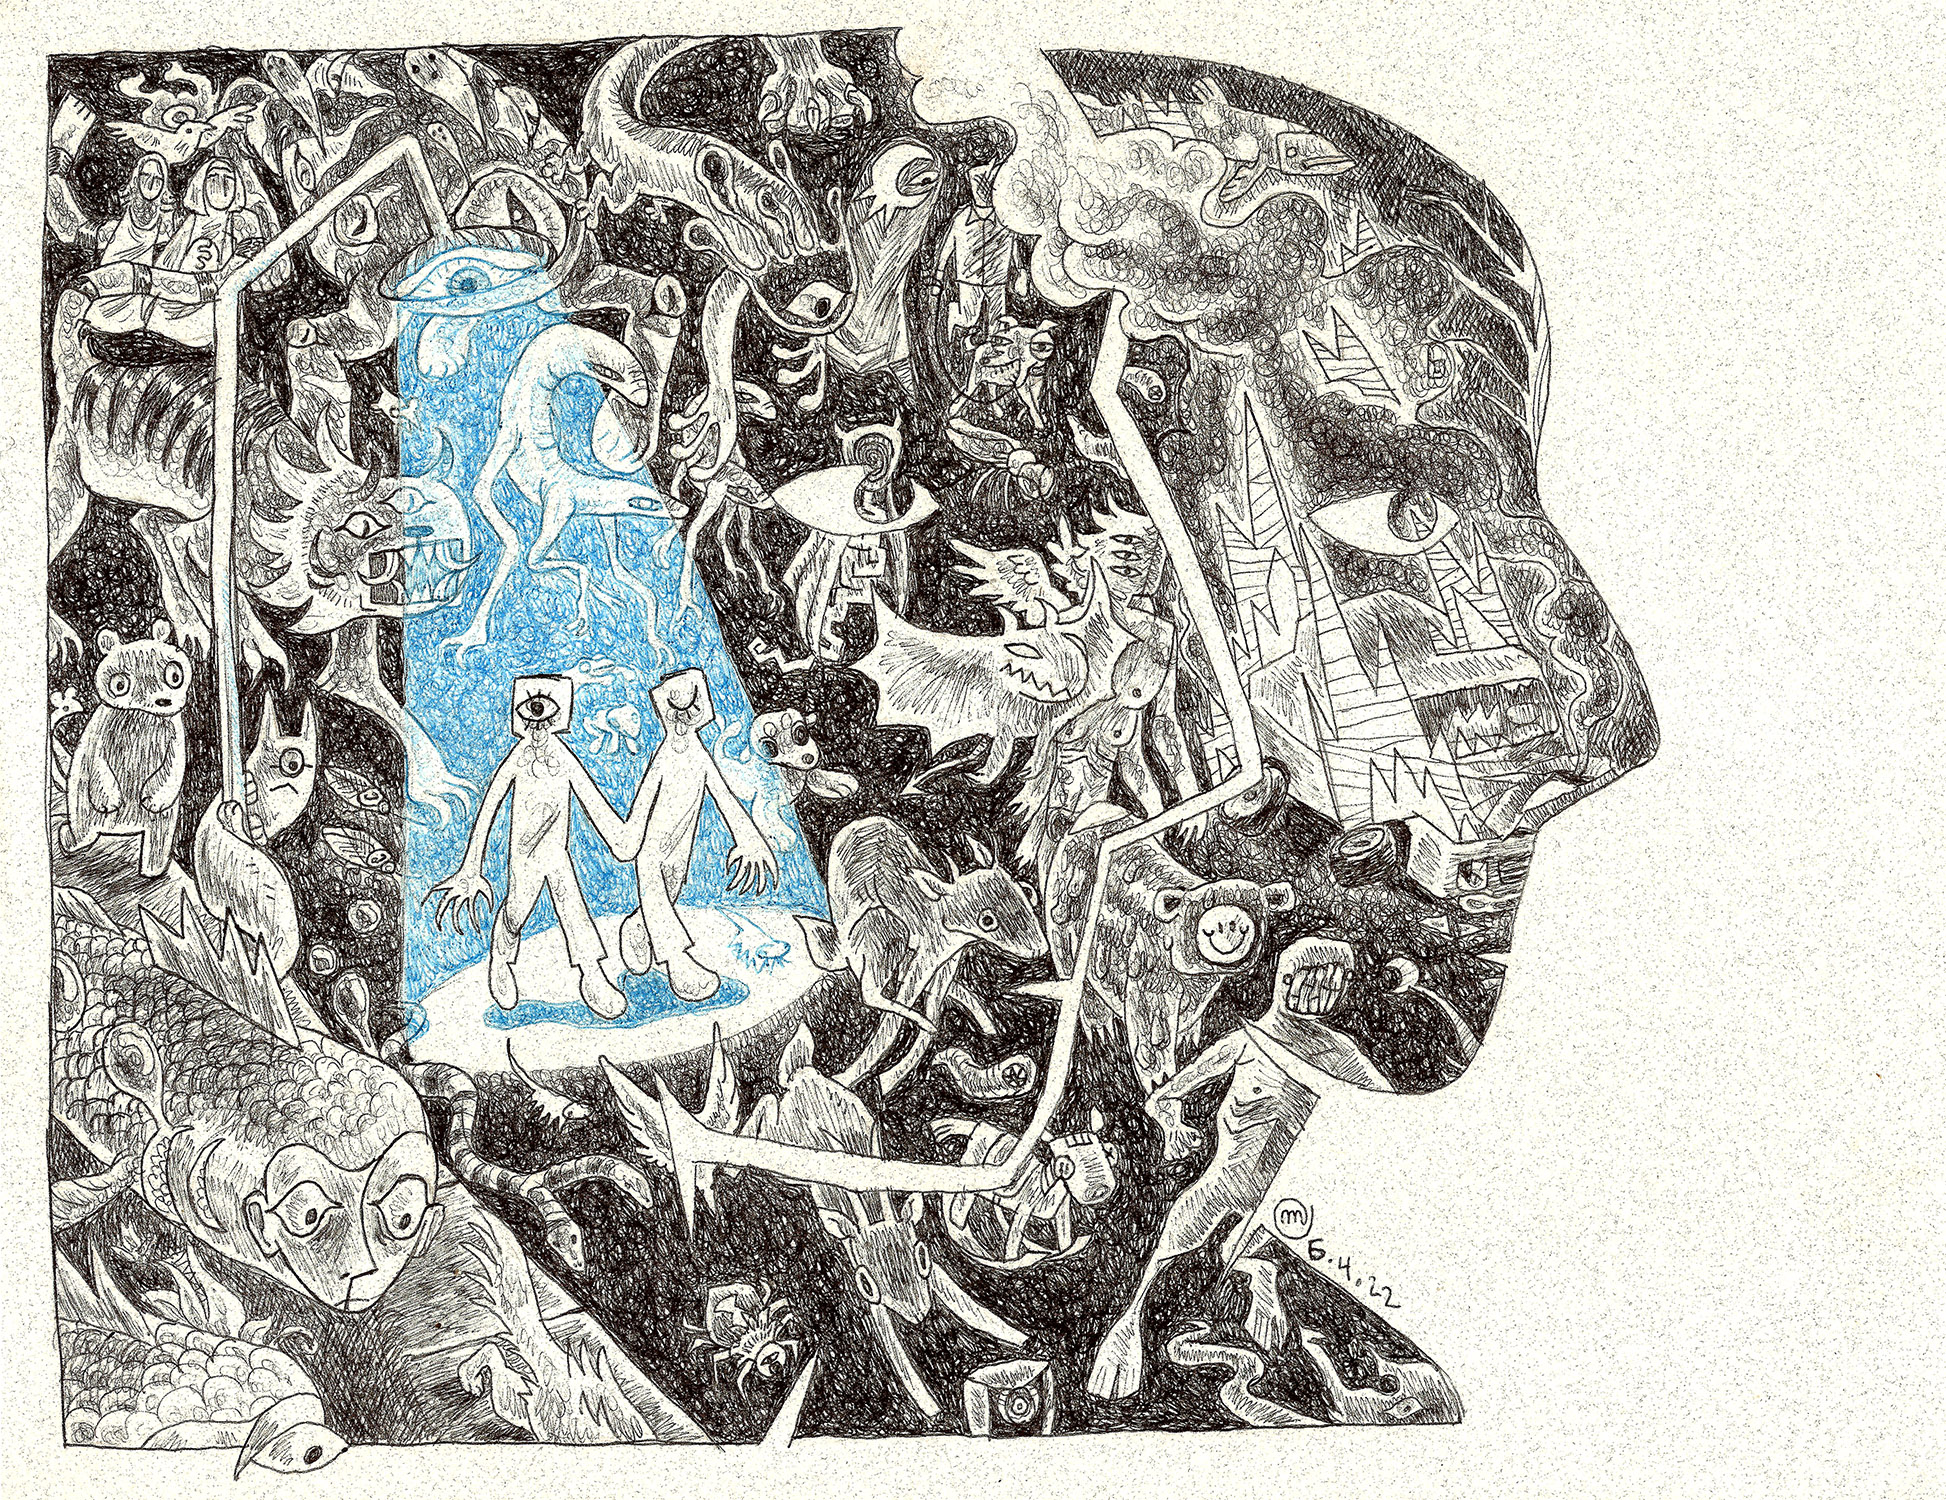 A pen drawing of two human head silhouettes. Inside is a scene of two people, lit in blue by a streetlight, walking down a dark street crowded with monsters and chaos.